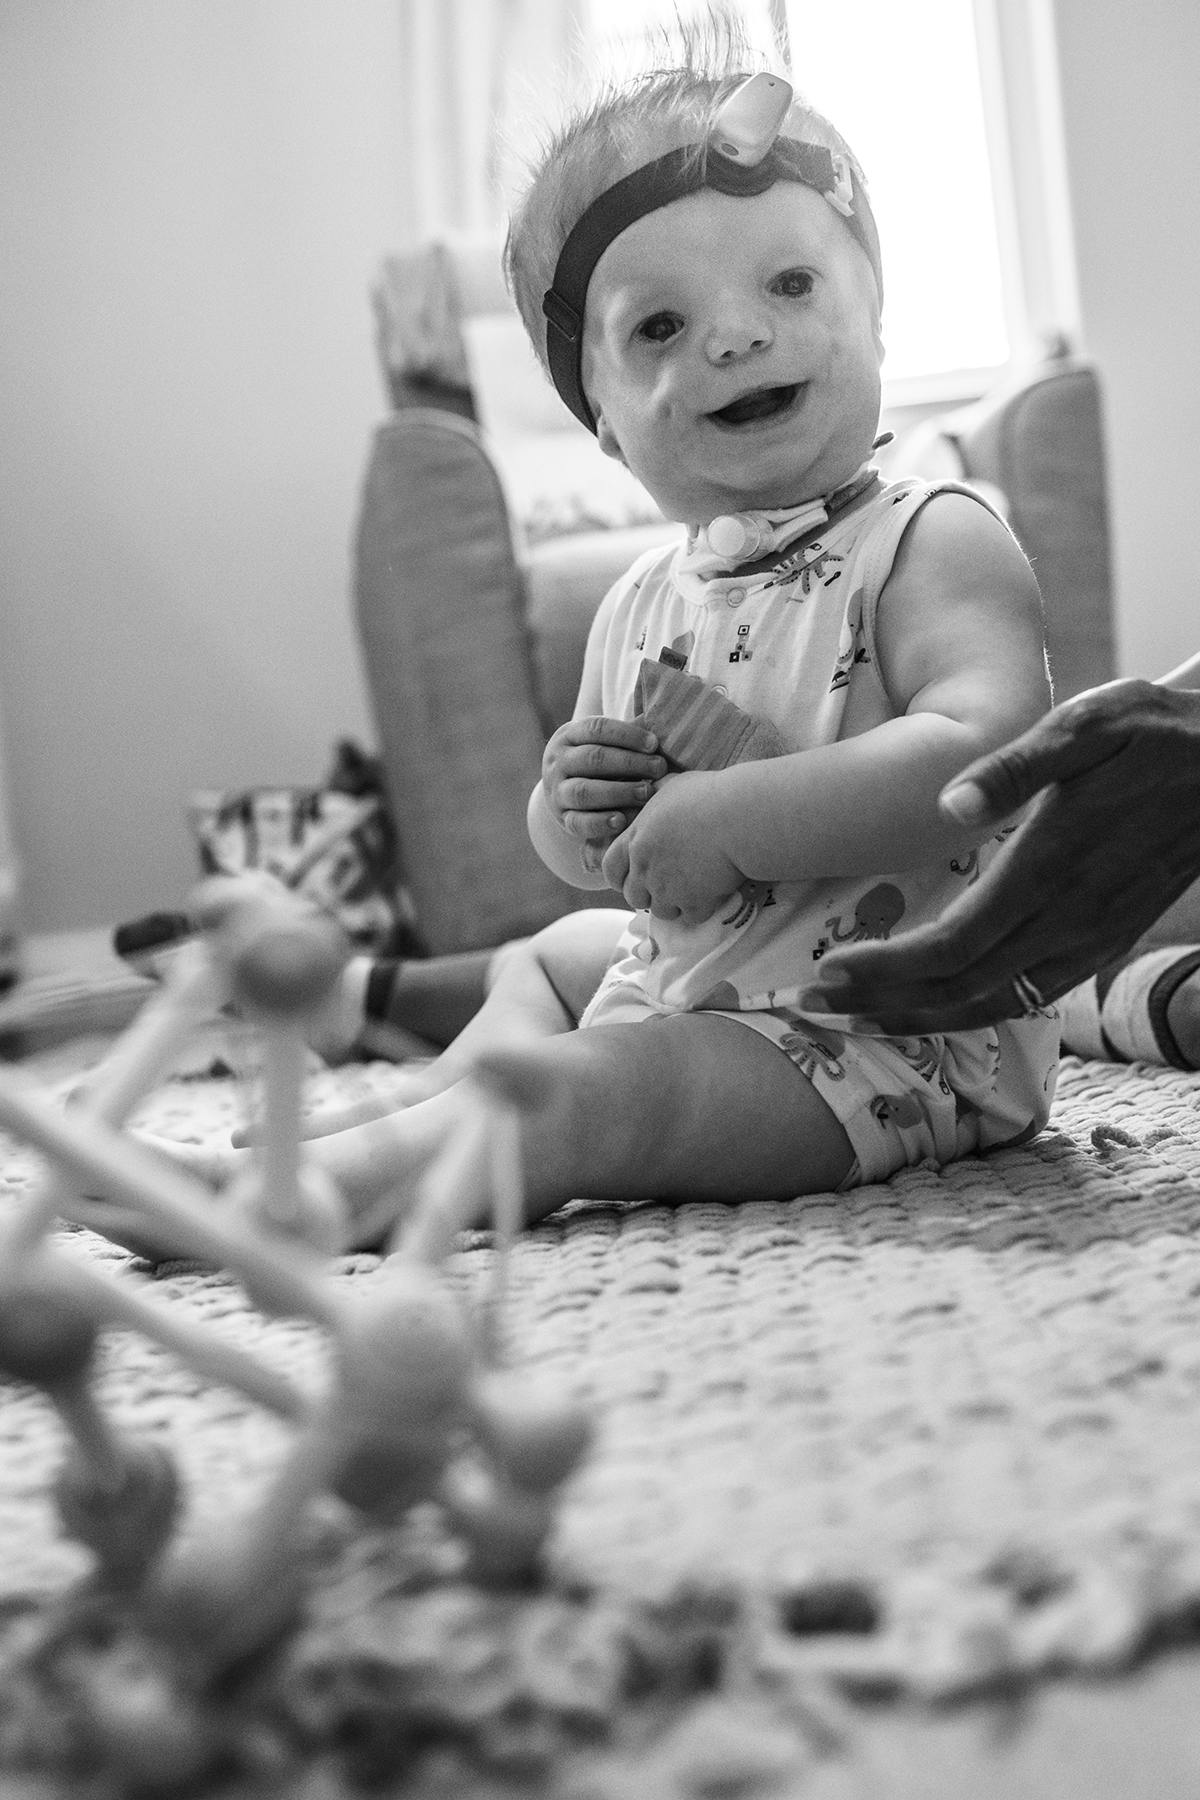 Photograph of young child with Treacher Collins syndrome by documentary photographer Kirsten Lewis